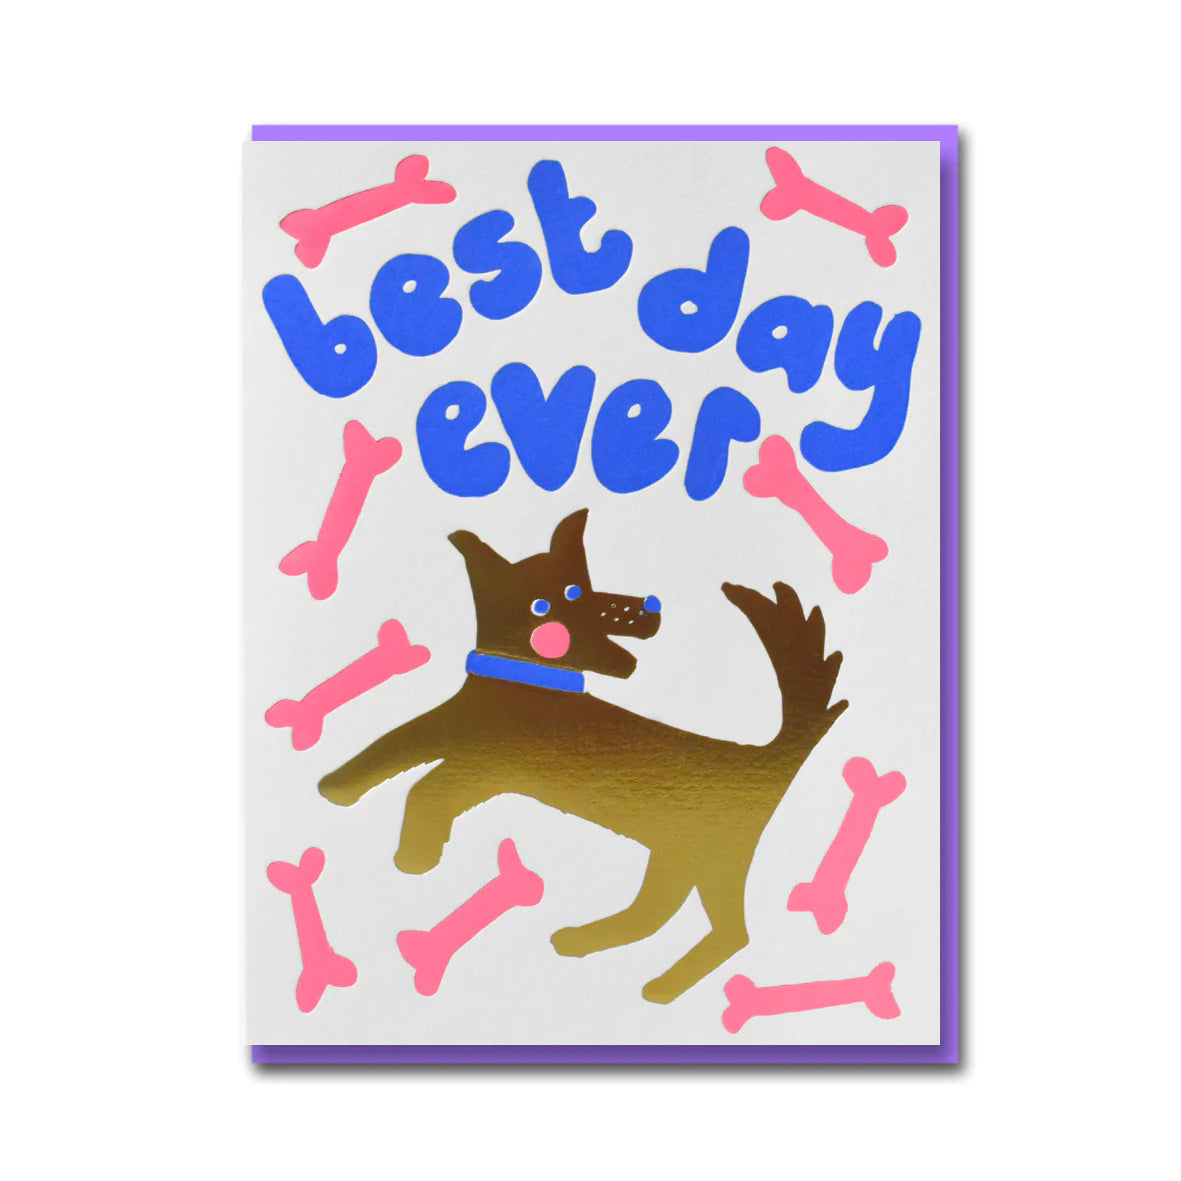 Best Day Ever Card